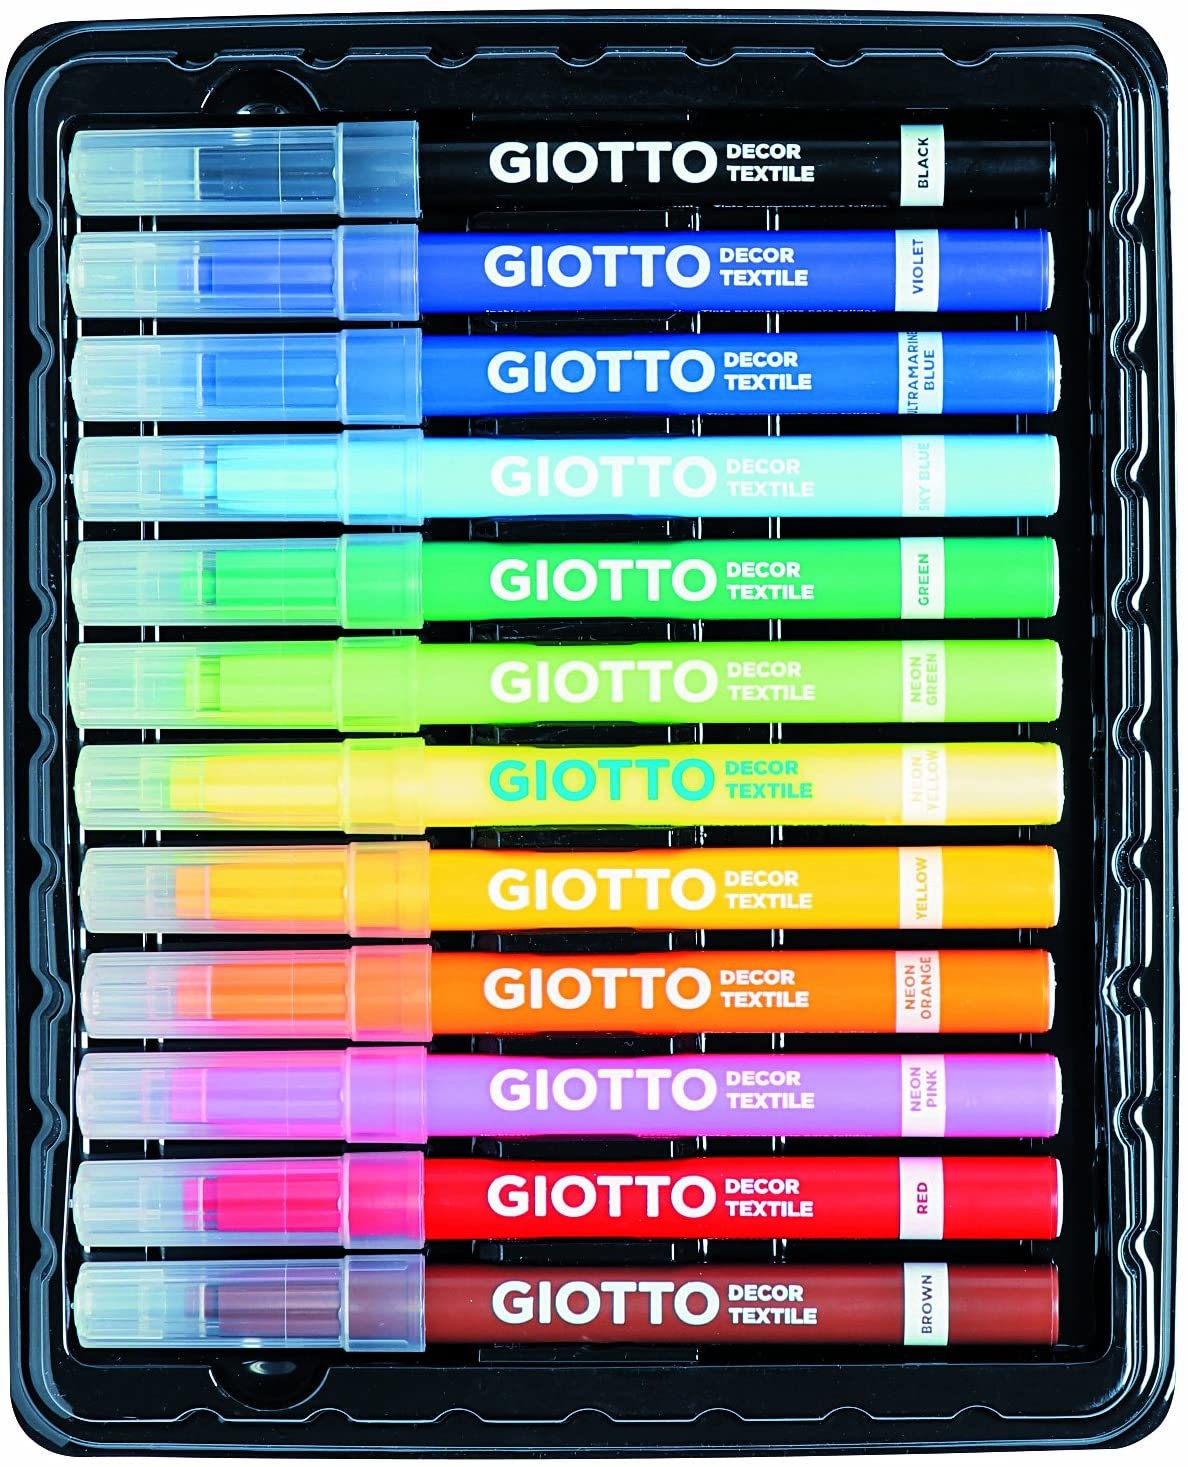 Giotto Decor Textile Permanent Markers 12 Pack